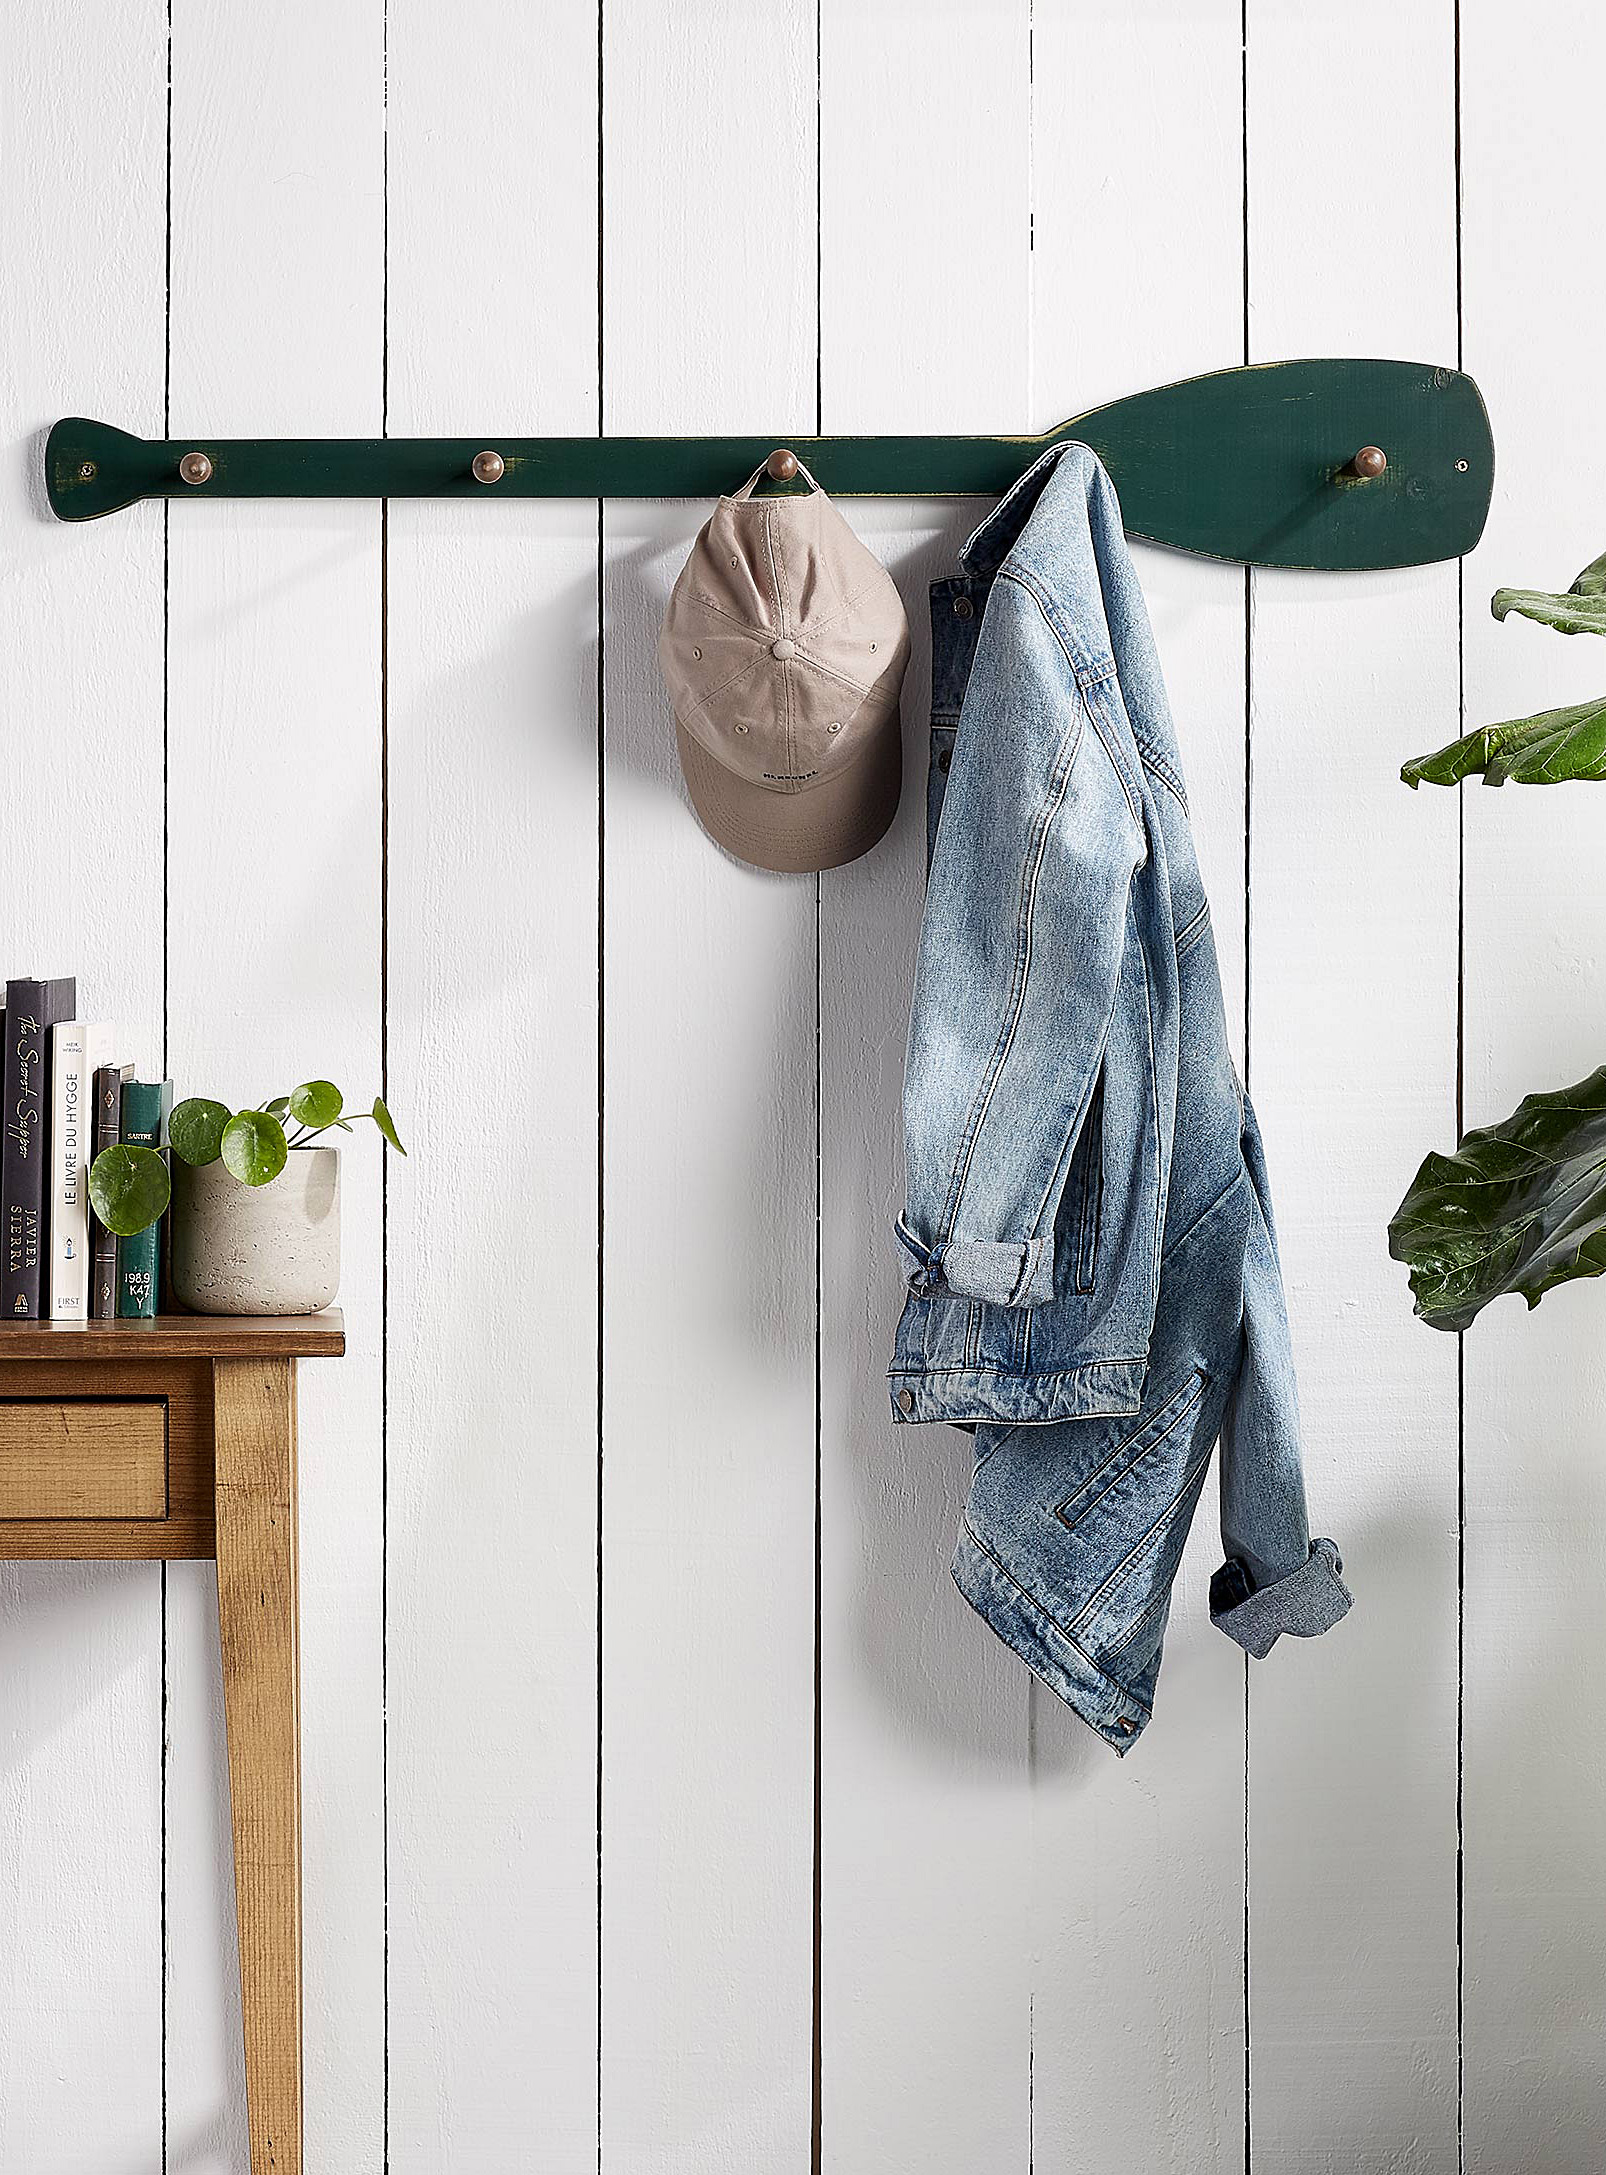 Springwater Woodcraft Paddle Wall Coat Rack In Green